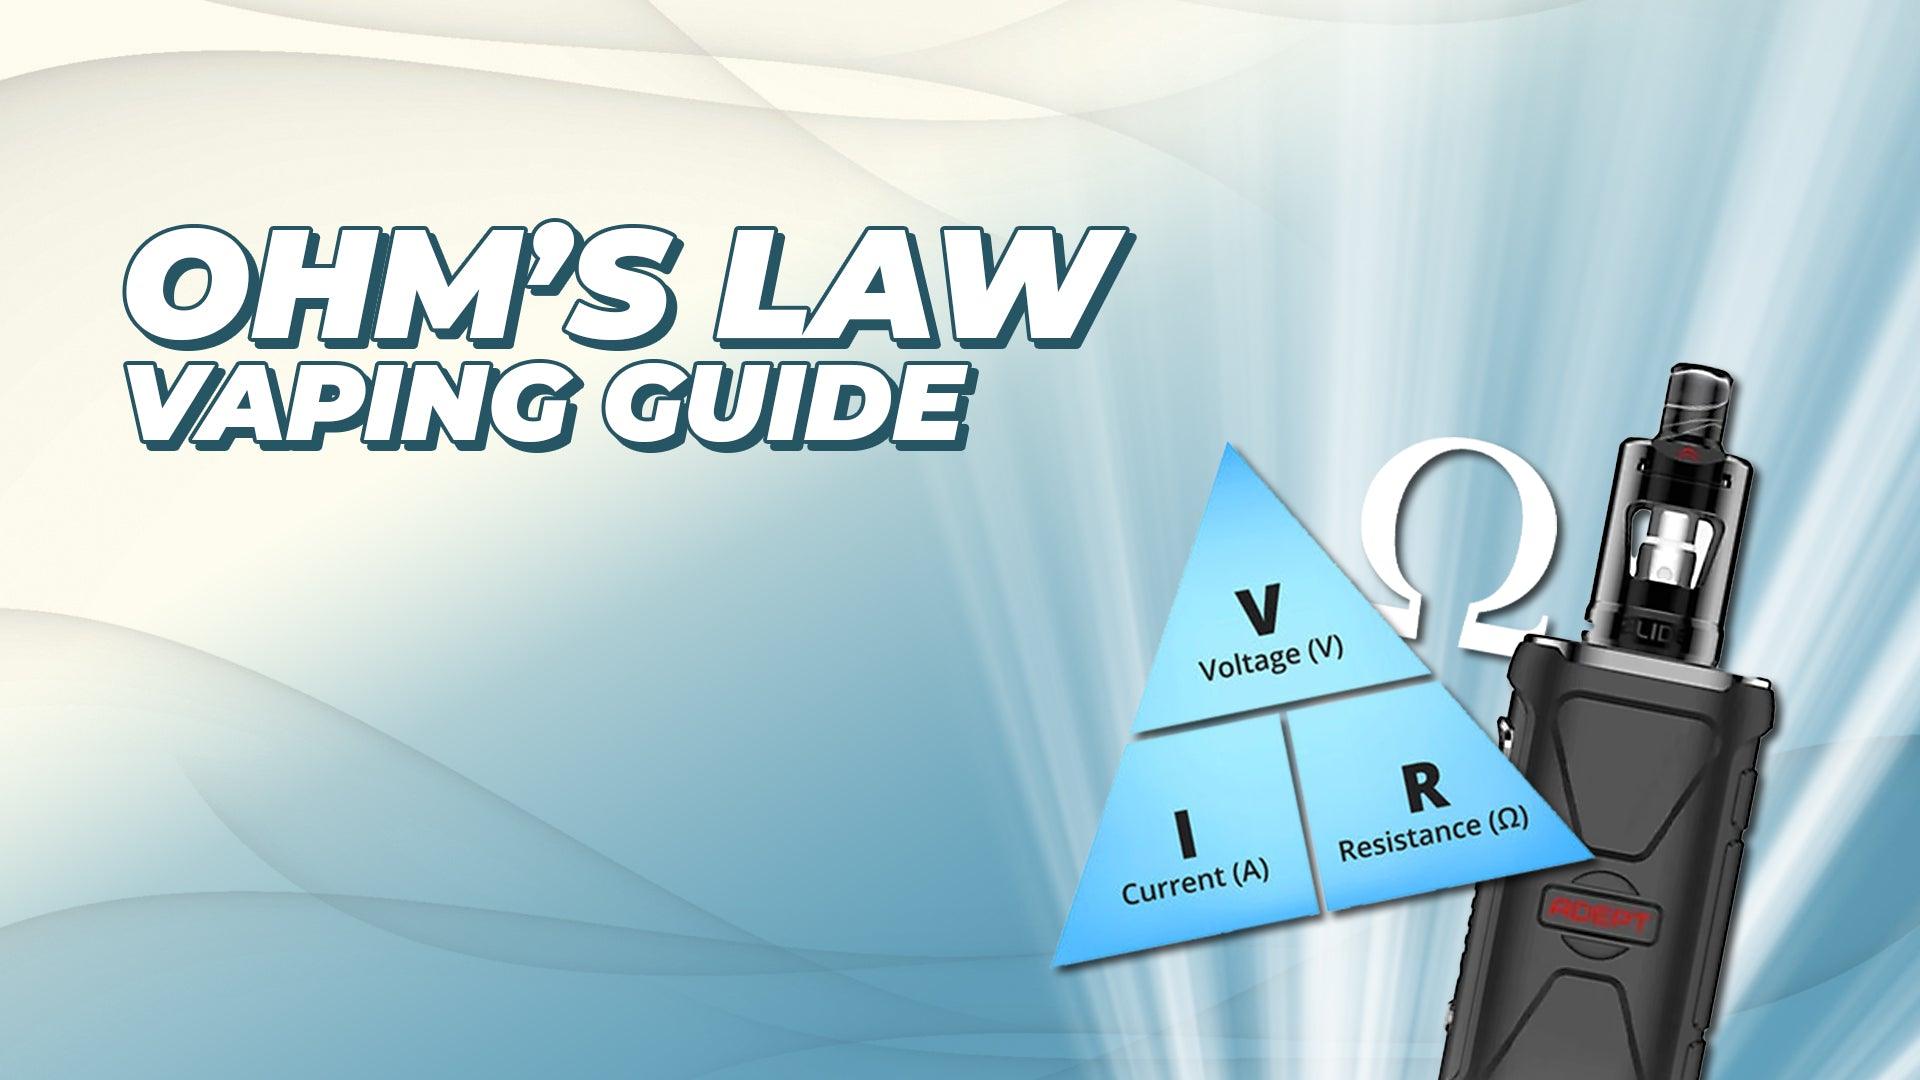 Ohm’s Law Vaping Guide - Category:Vaping, Sub Category:Coil Materials, Sub Category:Safety, Sub Category:Sub Ohm, Sub Category:Vaping Style